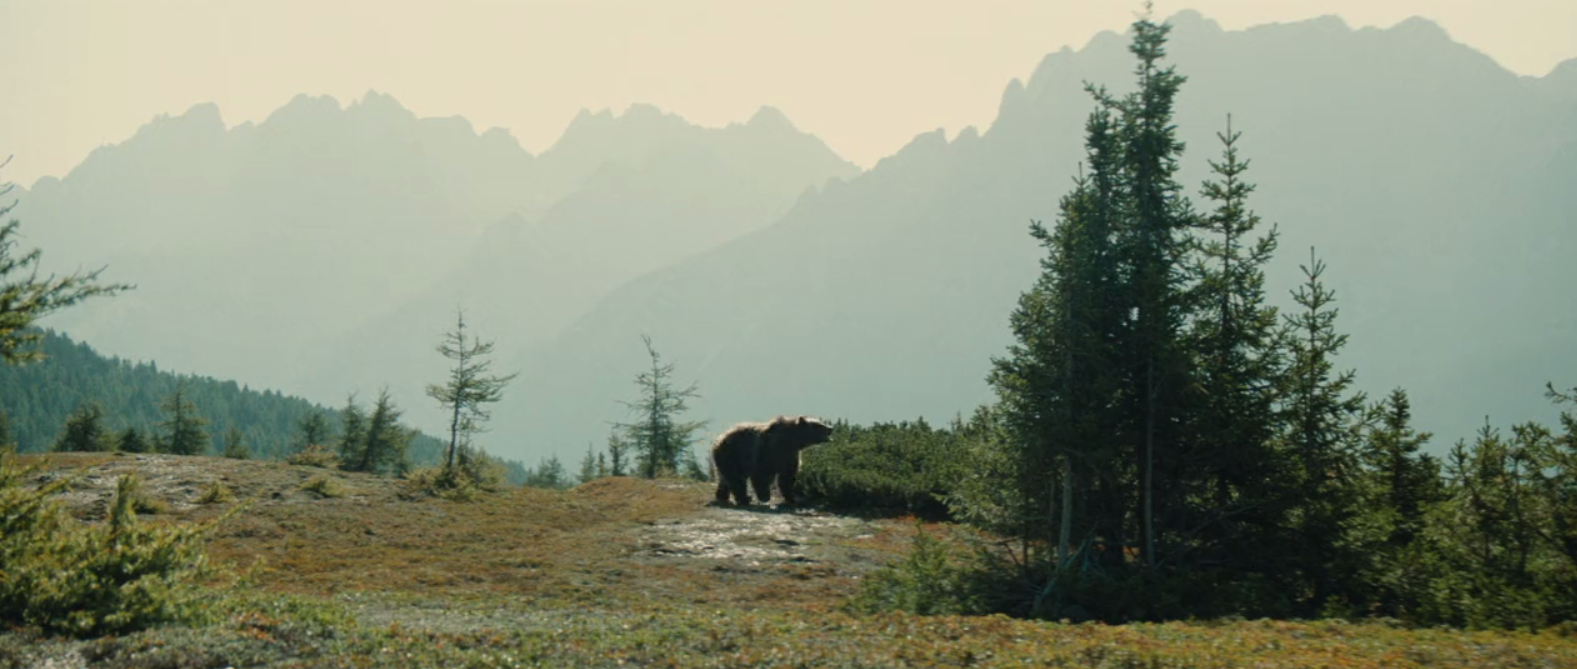 The Bear Movie Review